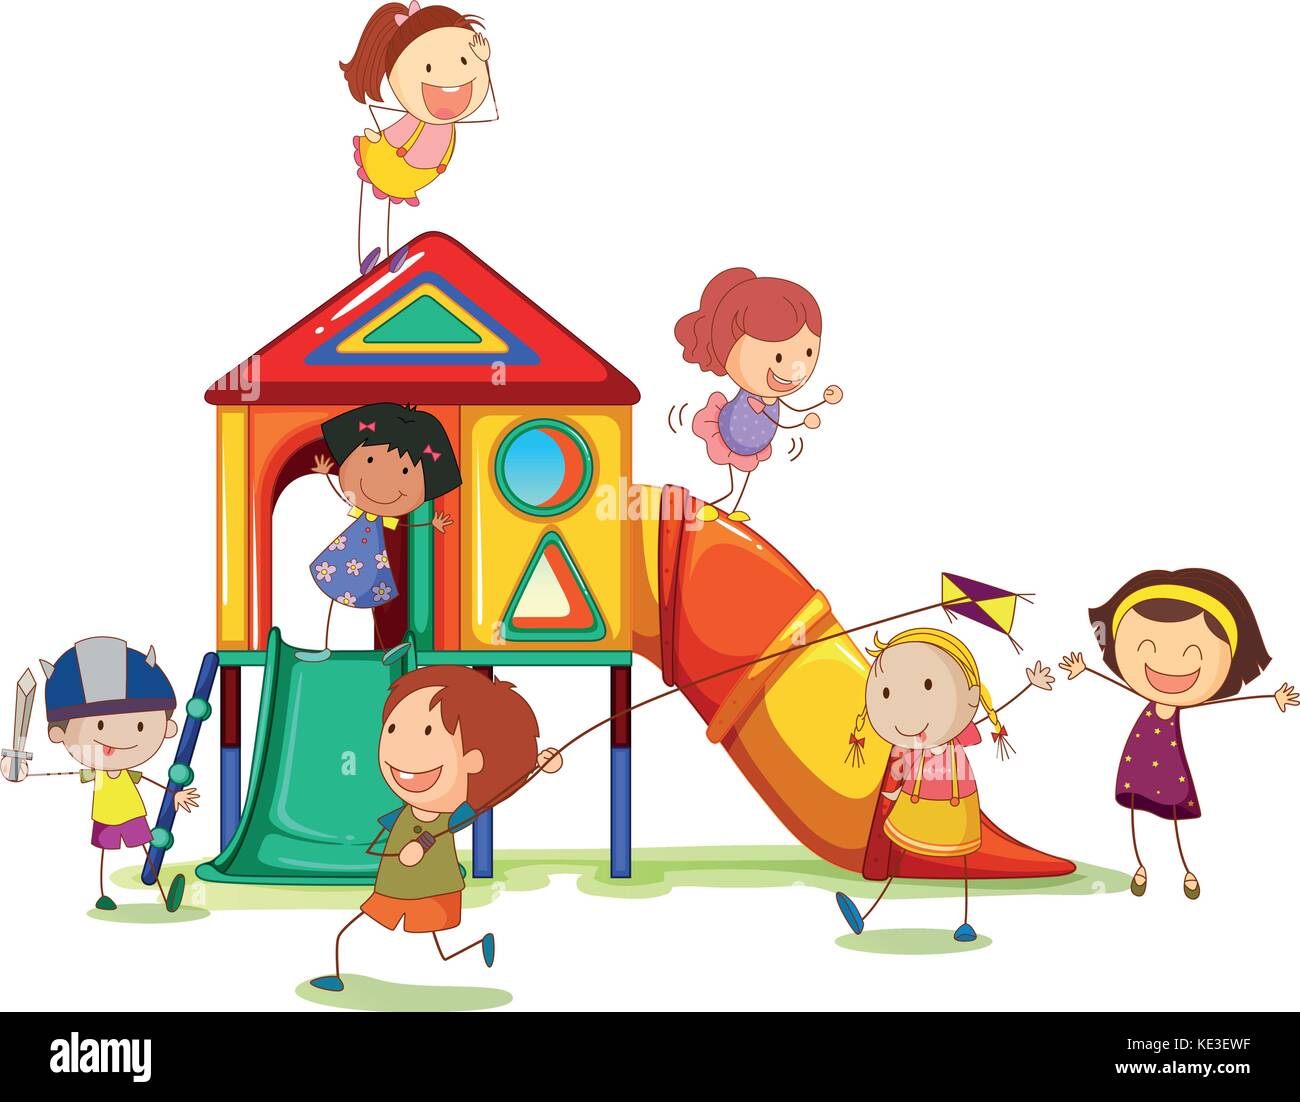 Children playing around the playhouse illustration Stock Vector